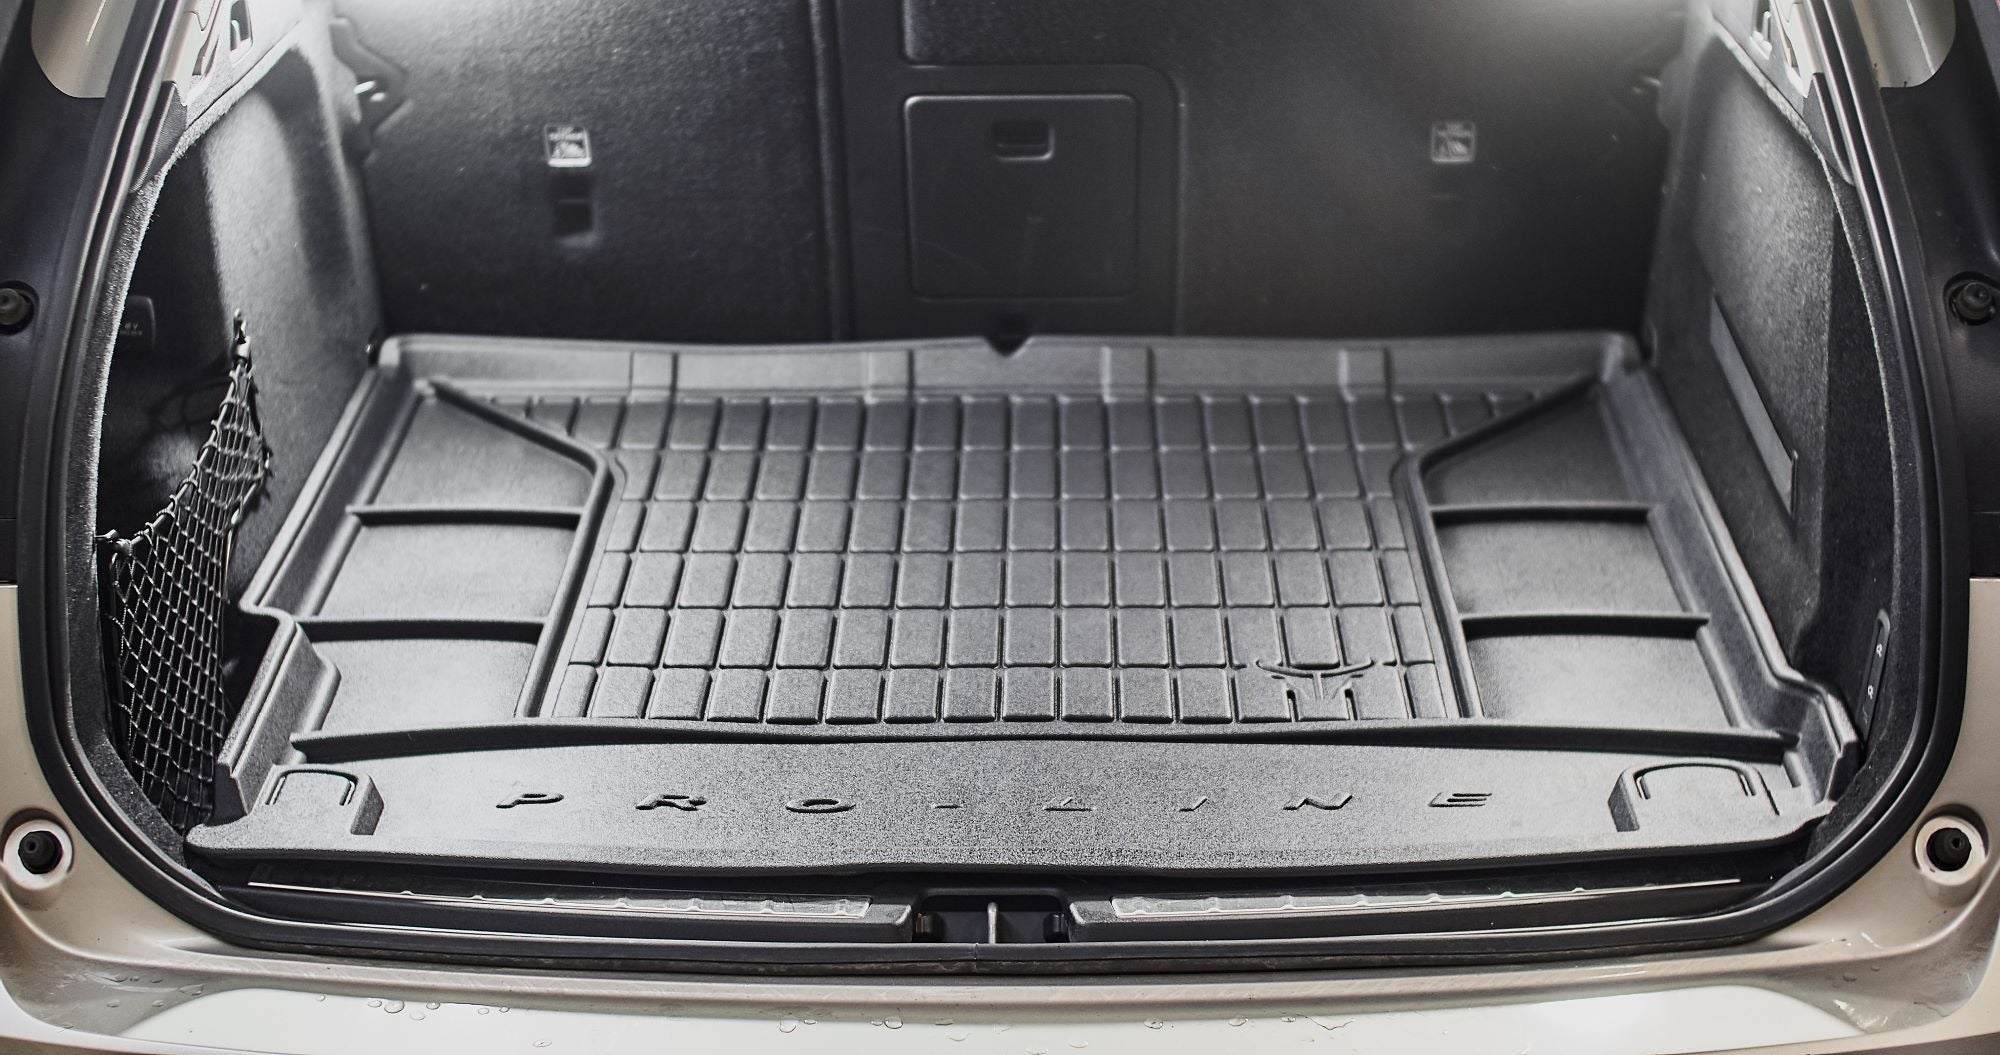 Tailored Car Boot Liner for Kia - Protect Your Boot from Dirt and Damage - Green Flag vGroup